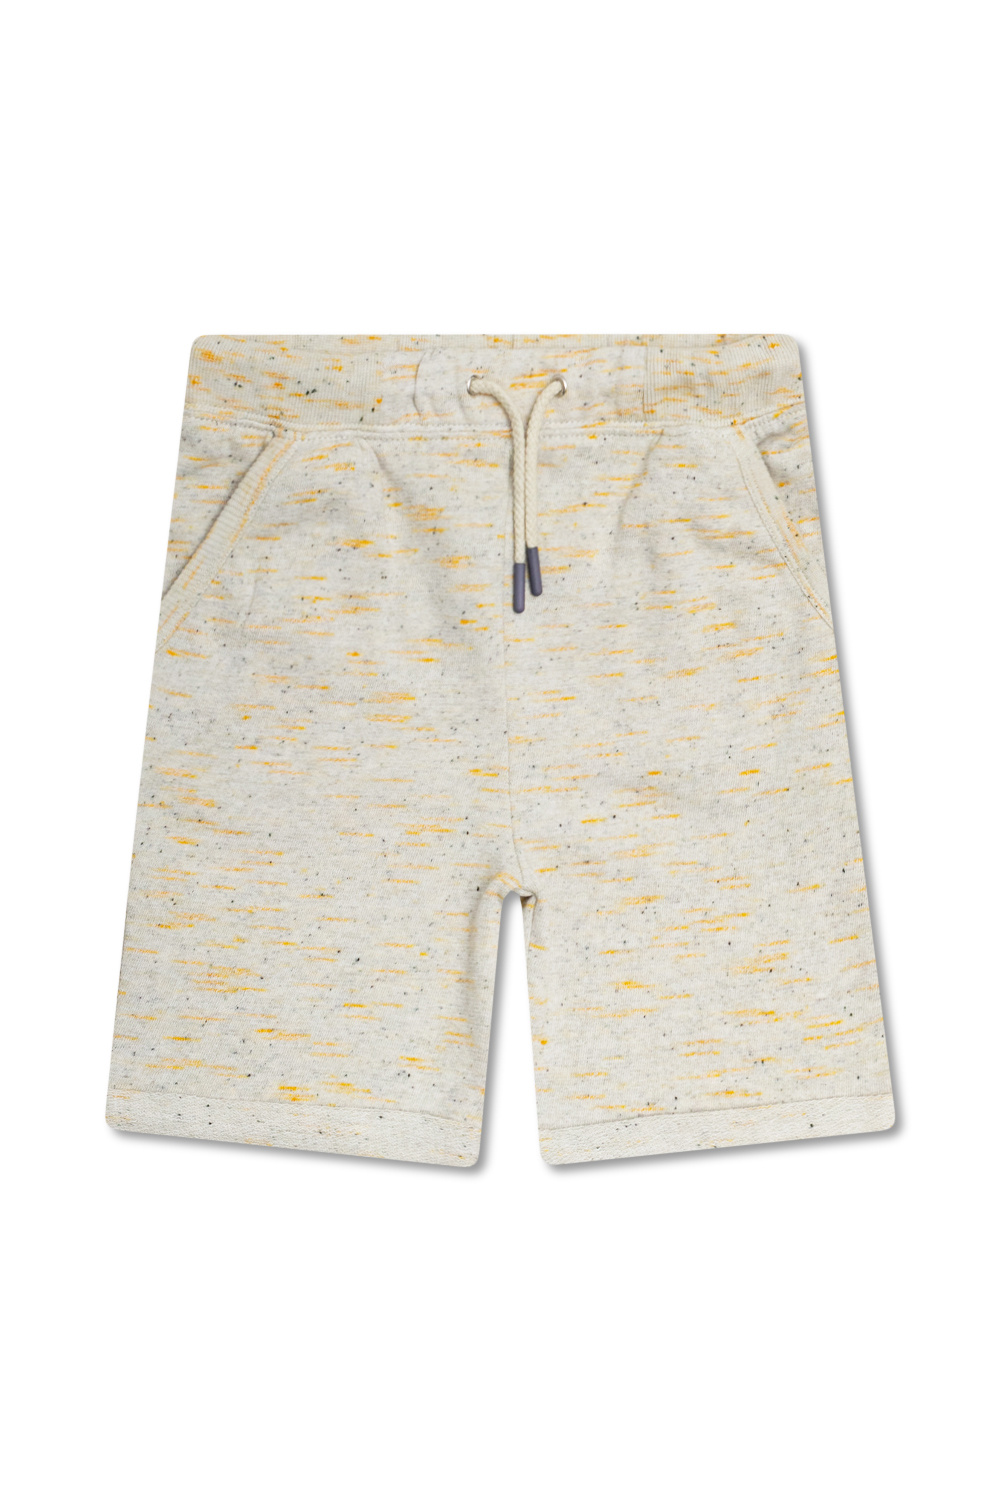 Bonpoint  Shorts with stitching details